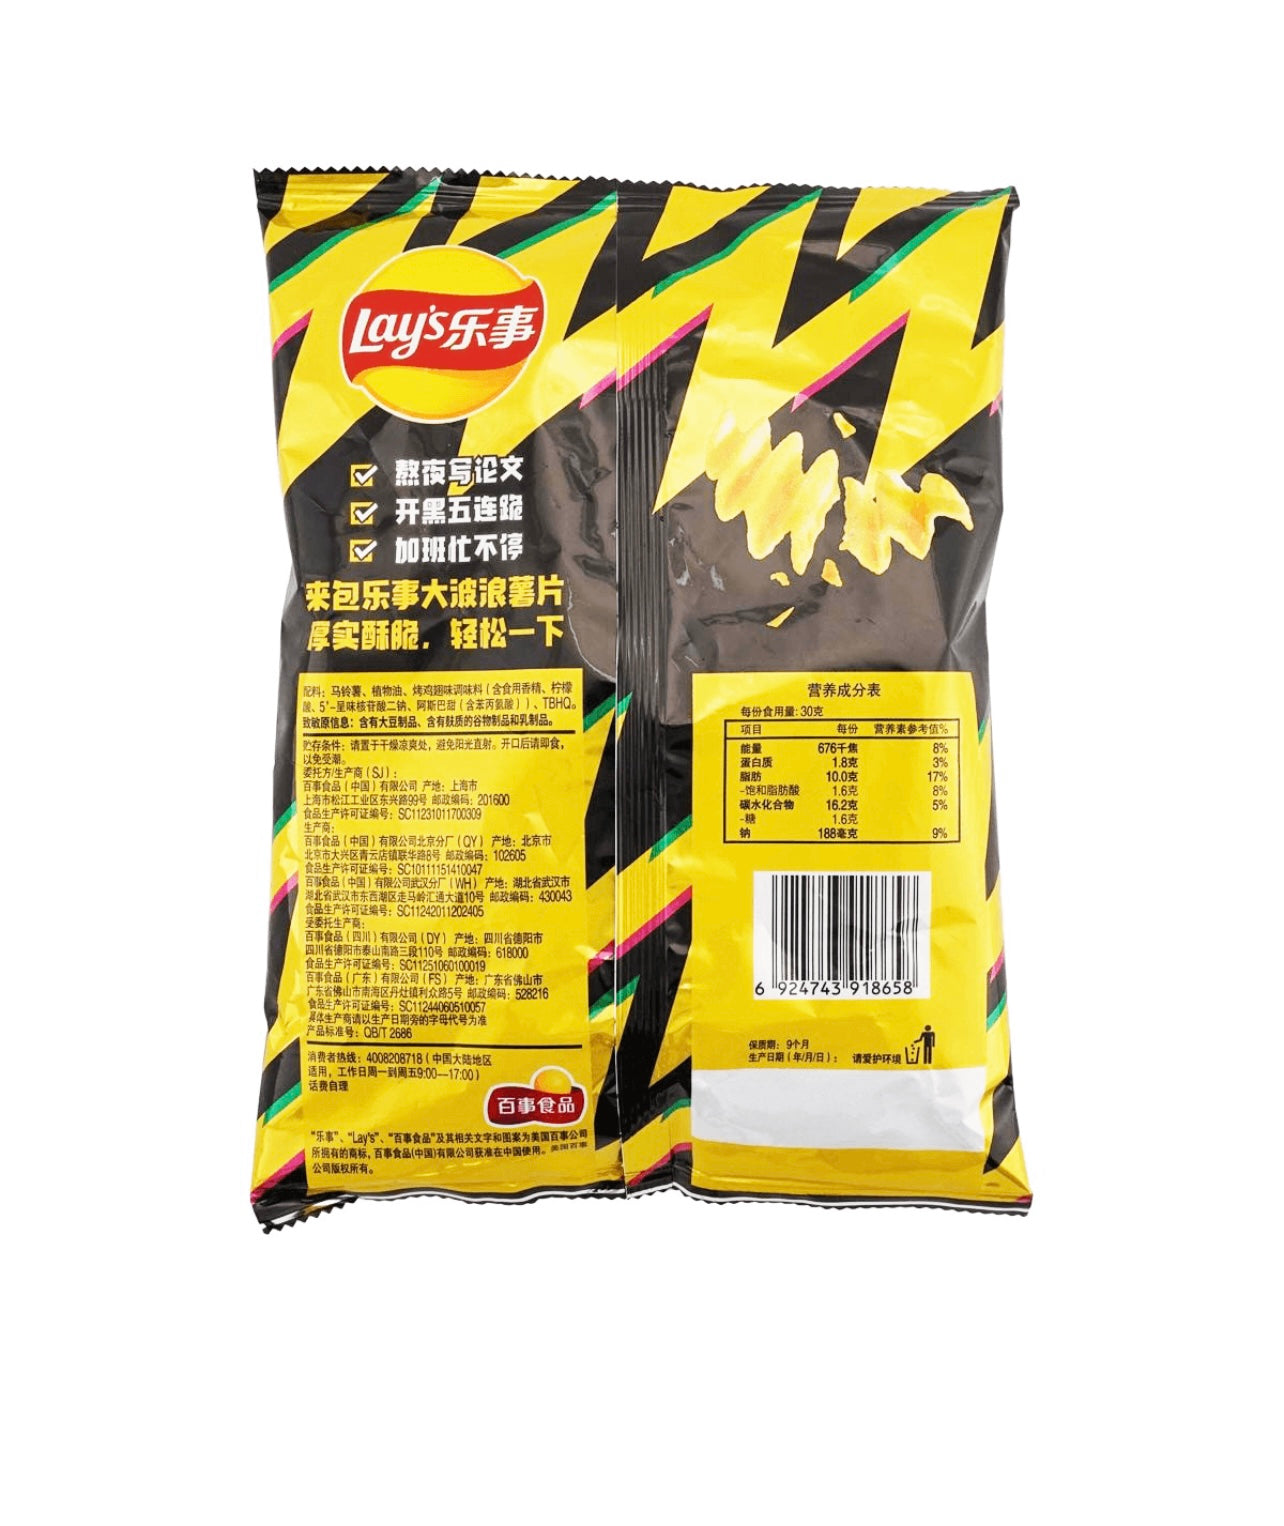 Roasted Chicken Wing Potato
Chips, 2.46oz